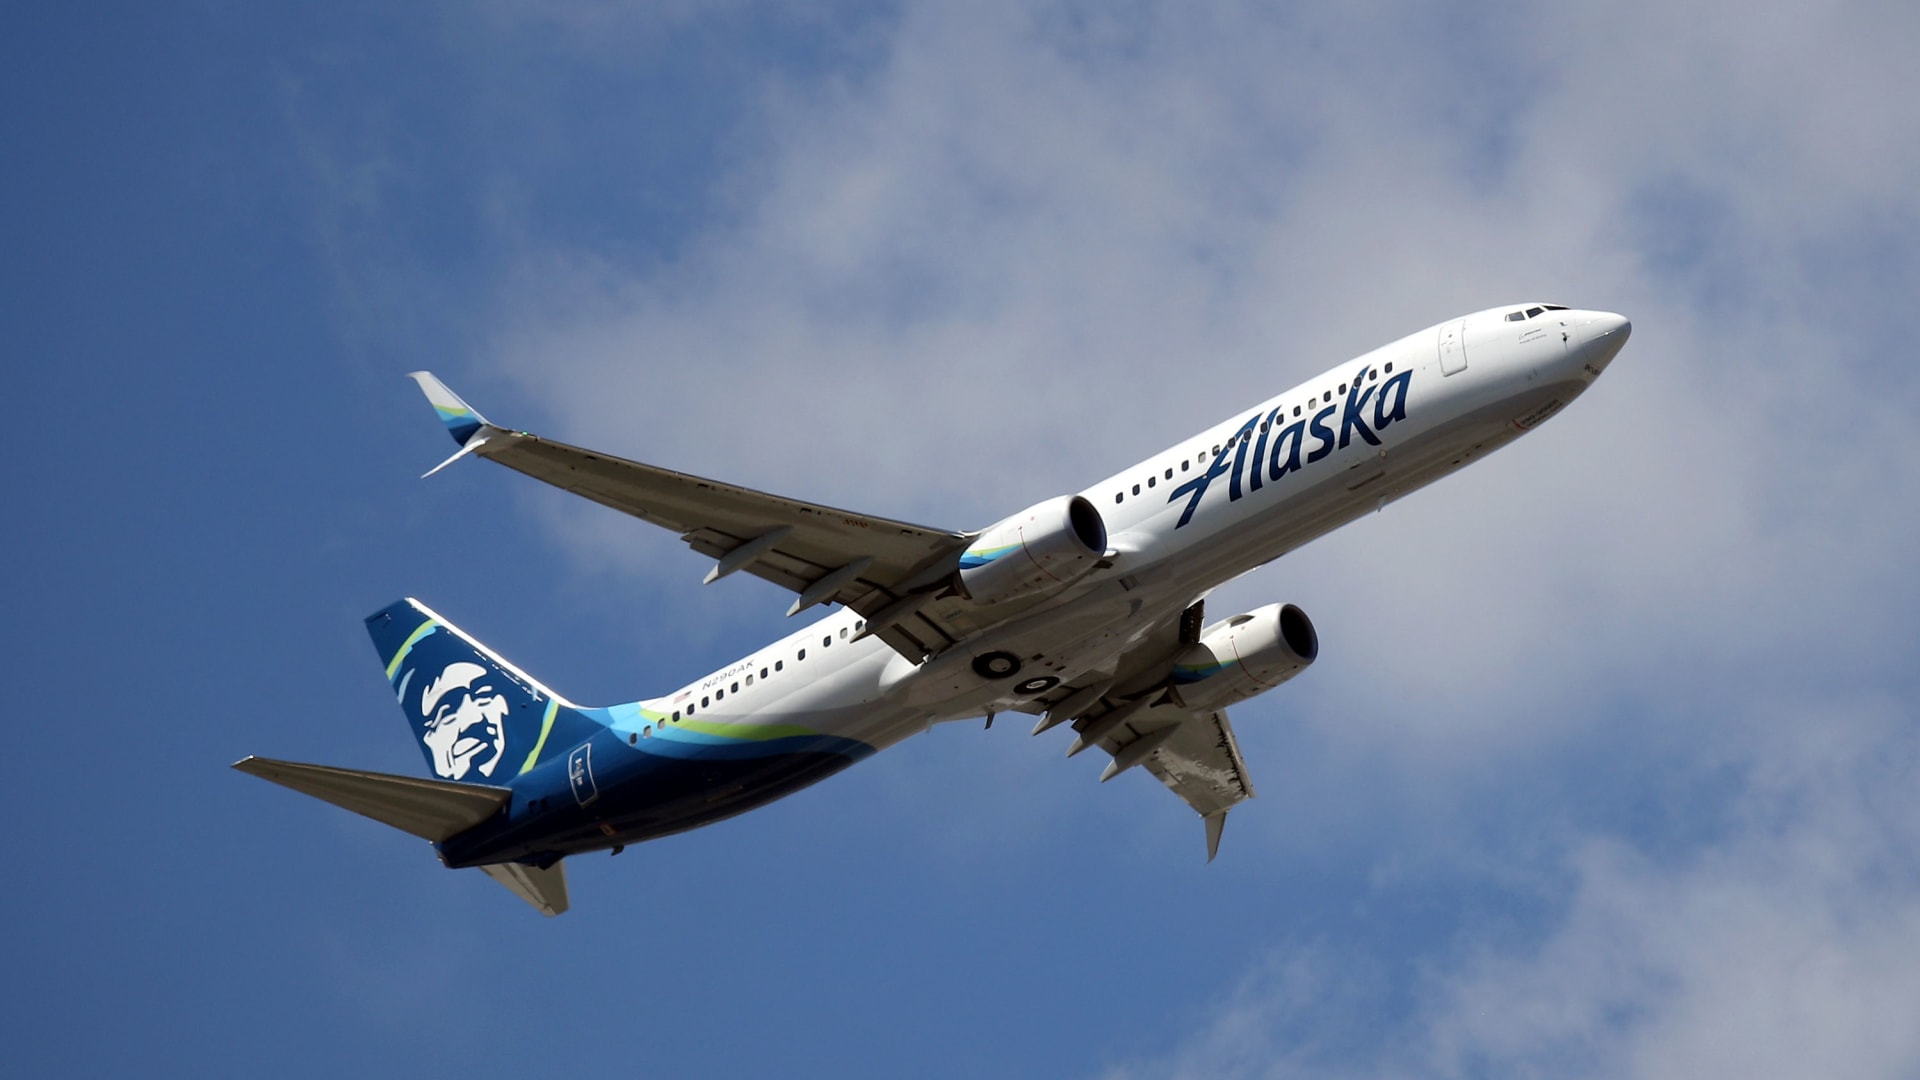 A Boeing 737-990 (ER) operated by Alaska Airlines takes off from JFK Airport.